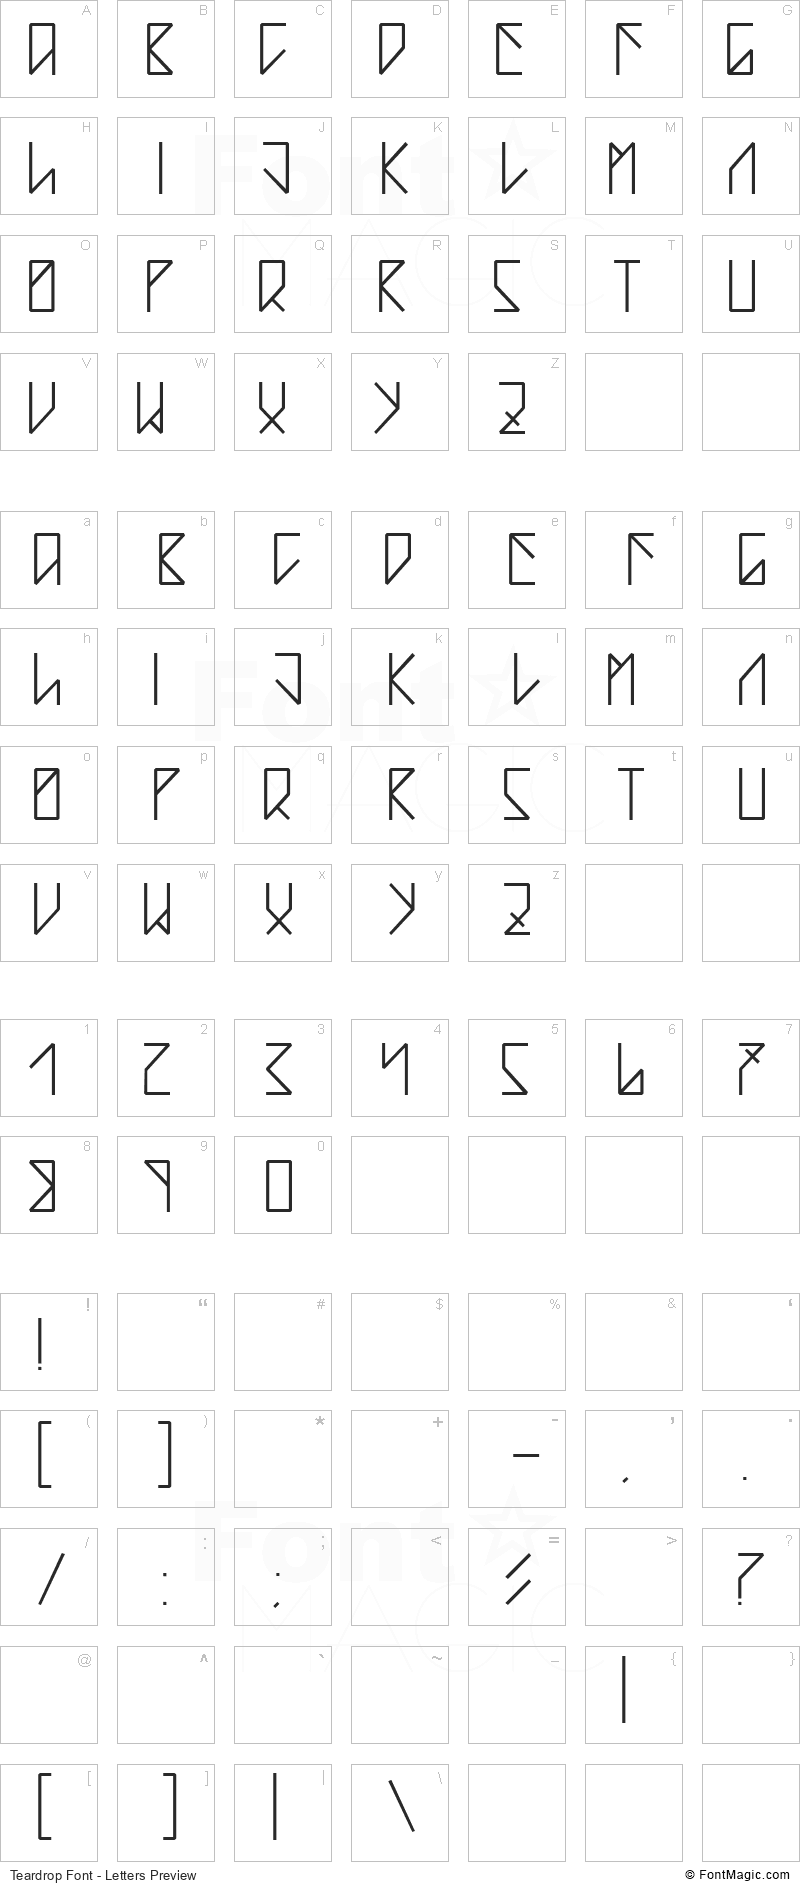 Teardrop Font - All Latters Preview Chart